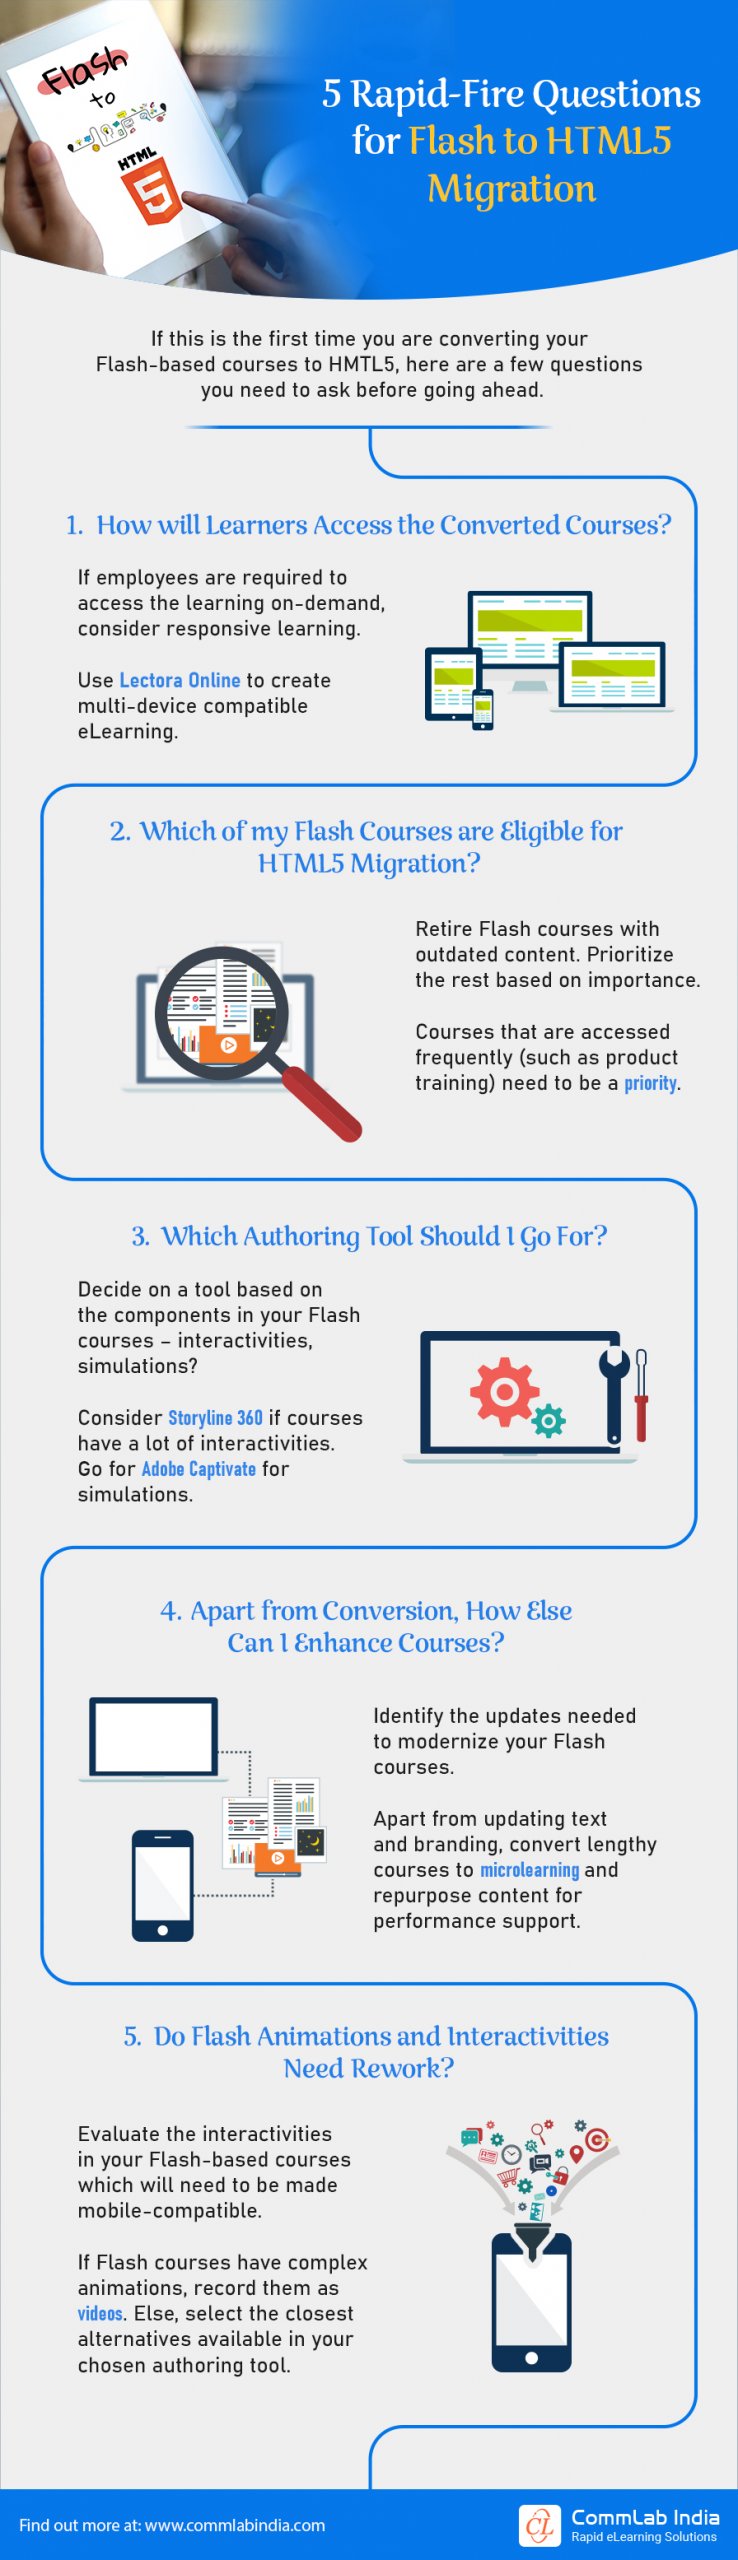 5 Rapid Fire Questions for Flash to HTML5 Migration [Infographic]